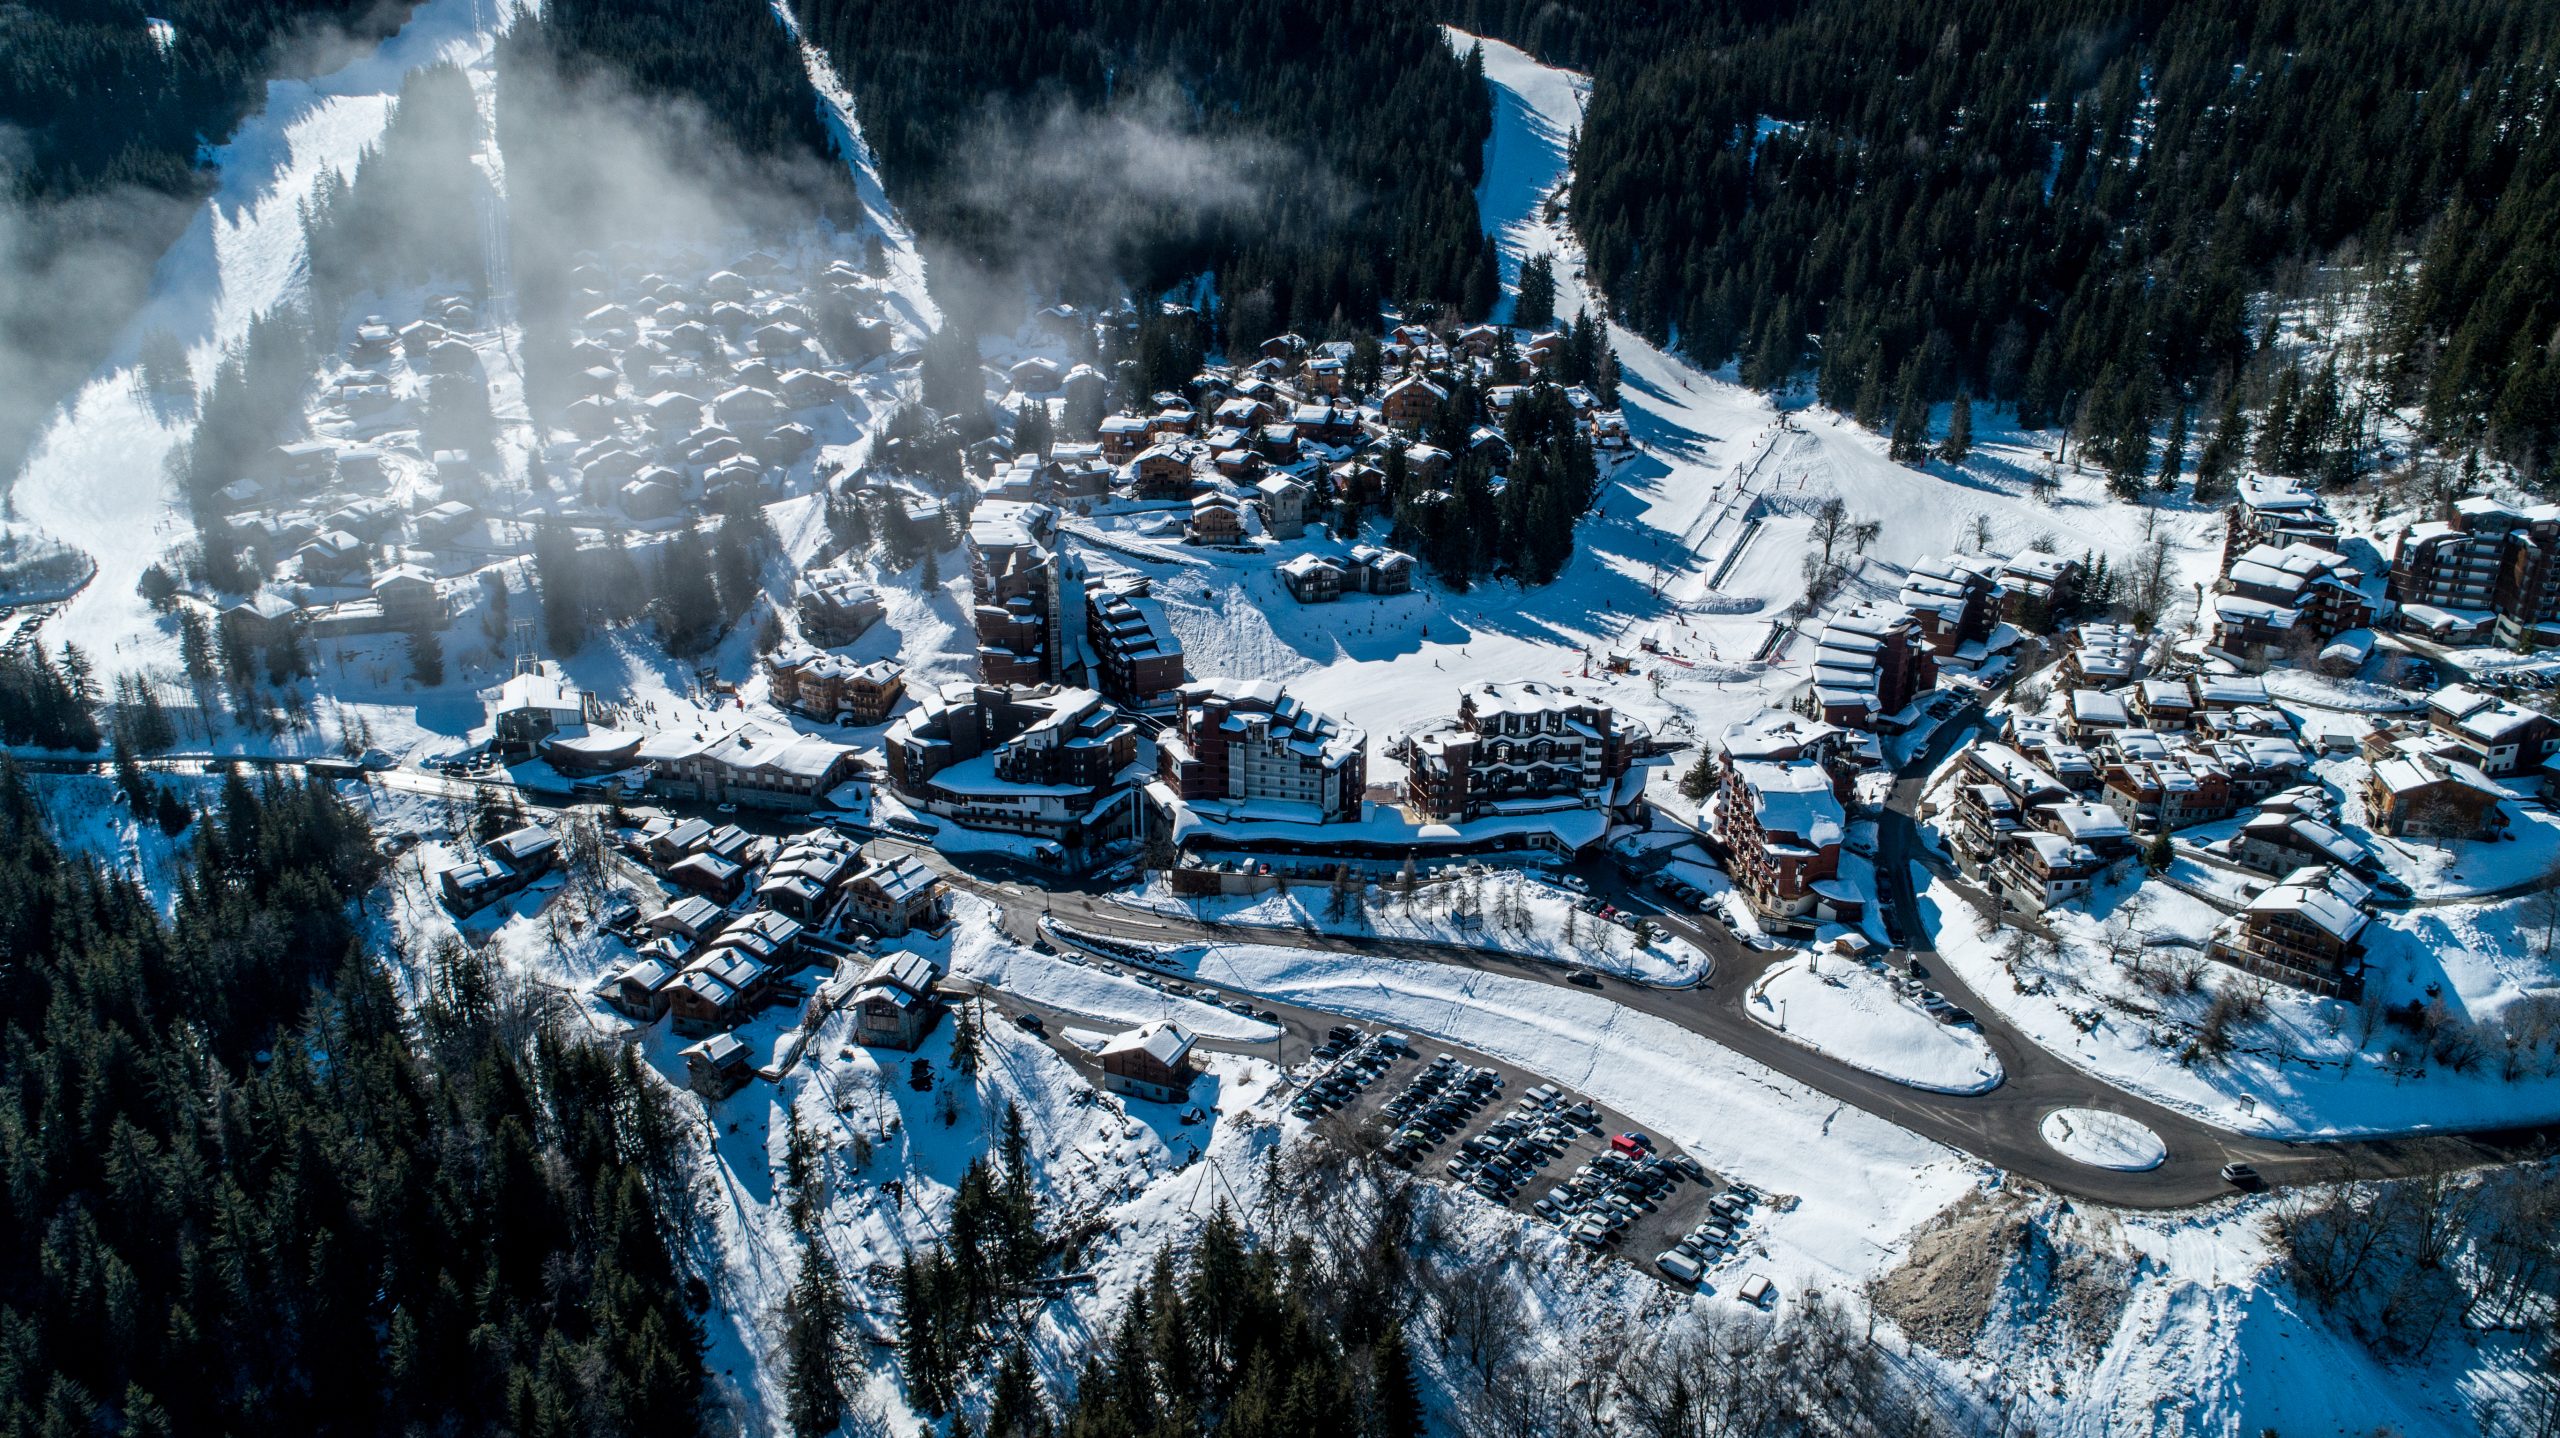 You are currently viewing A Winter Wonderland: My Ski Season Job Adventure in La Tania